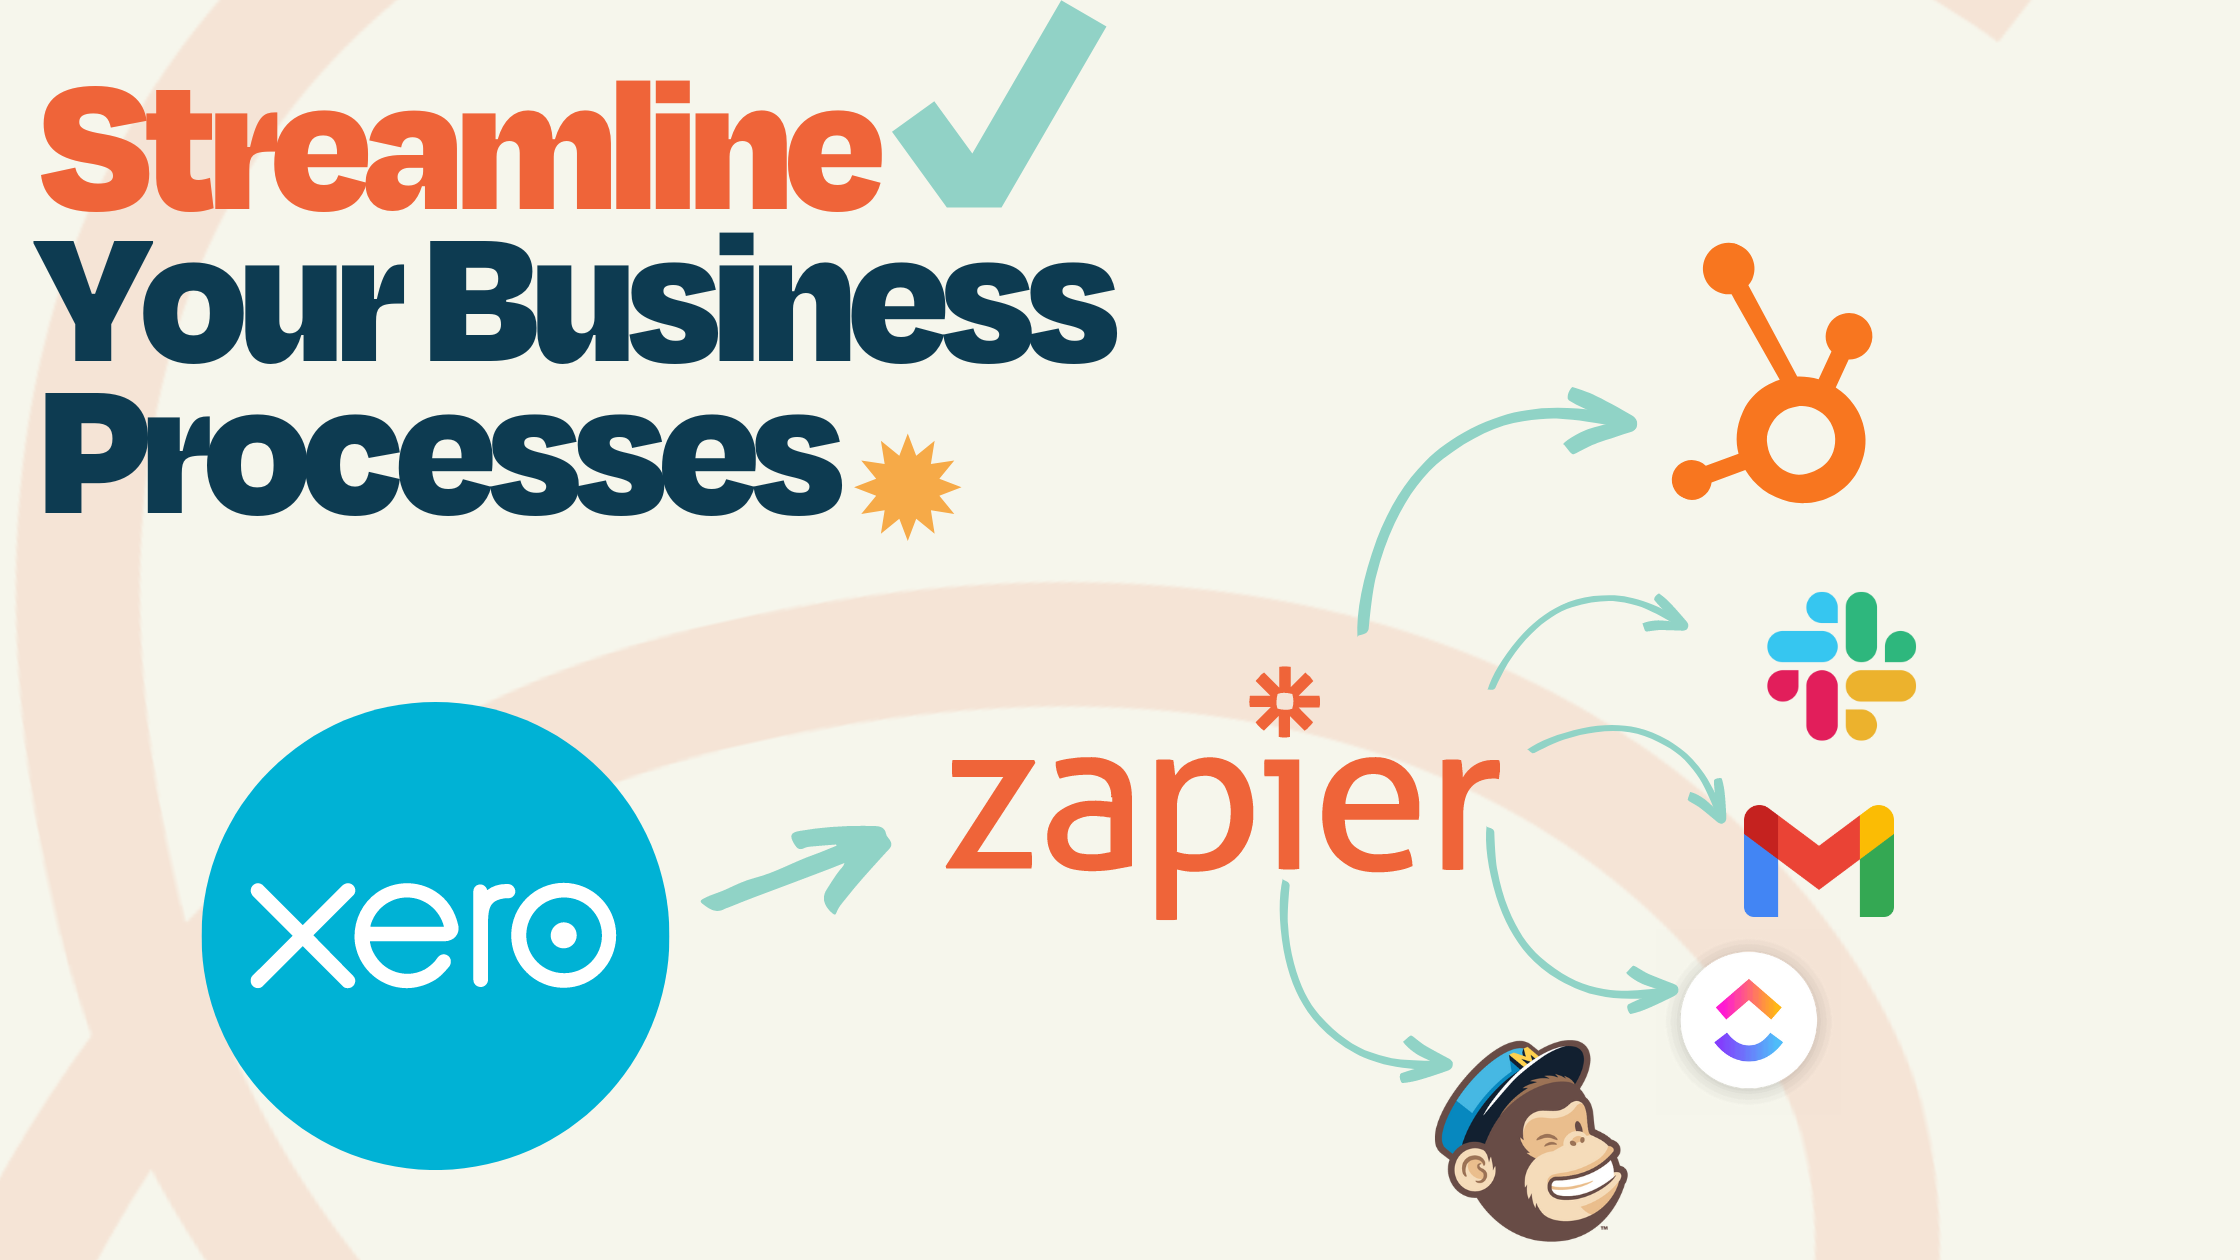 Using Zapier and Xero to Streamline Your Business Processes